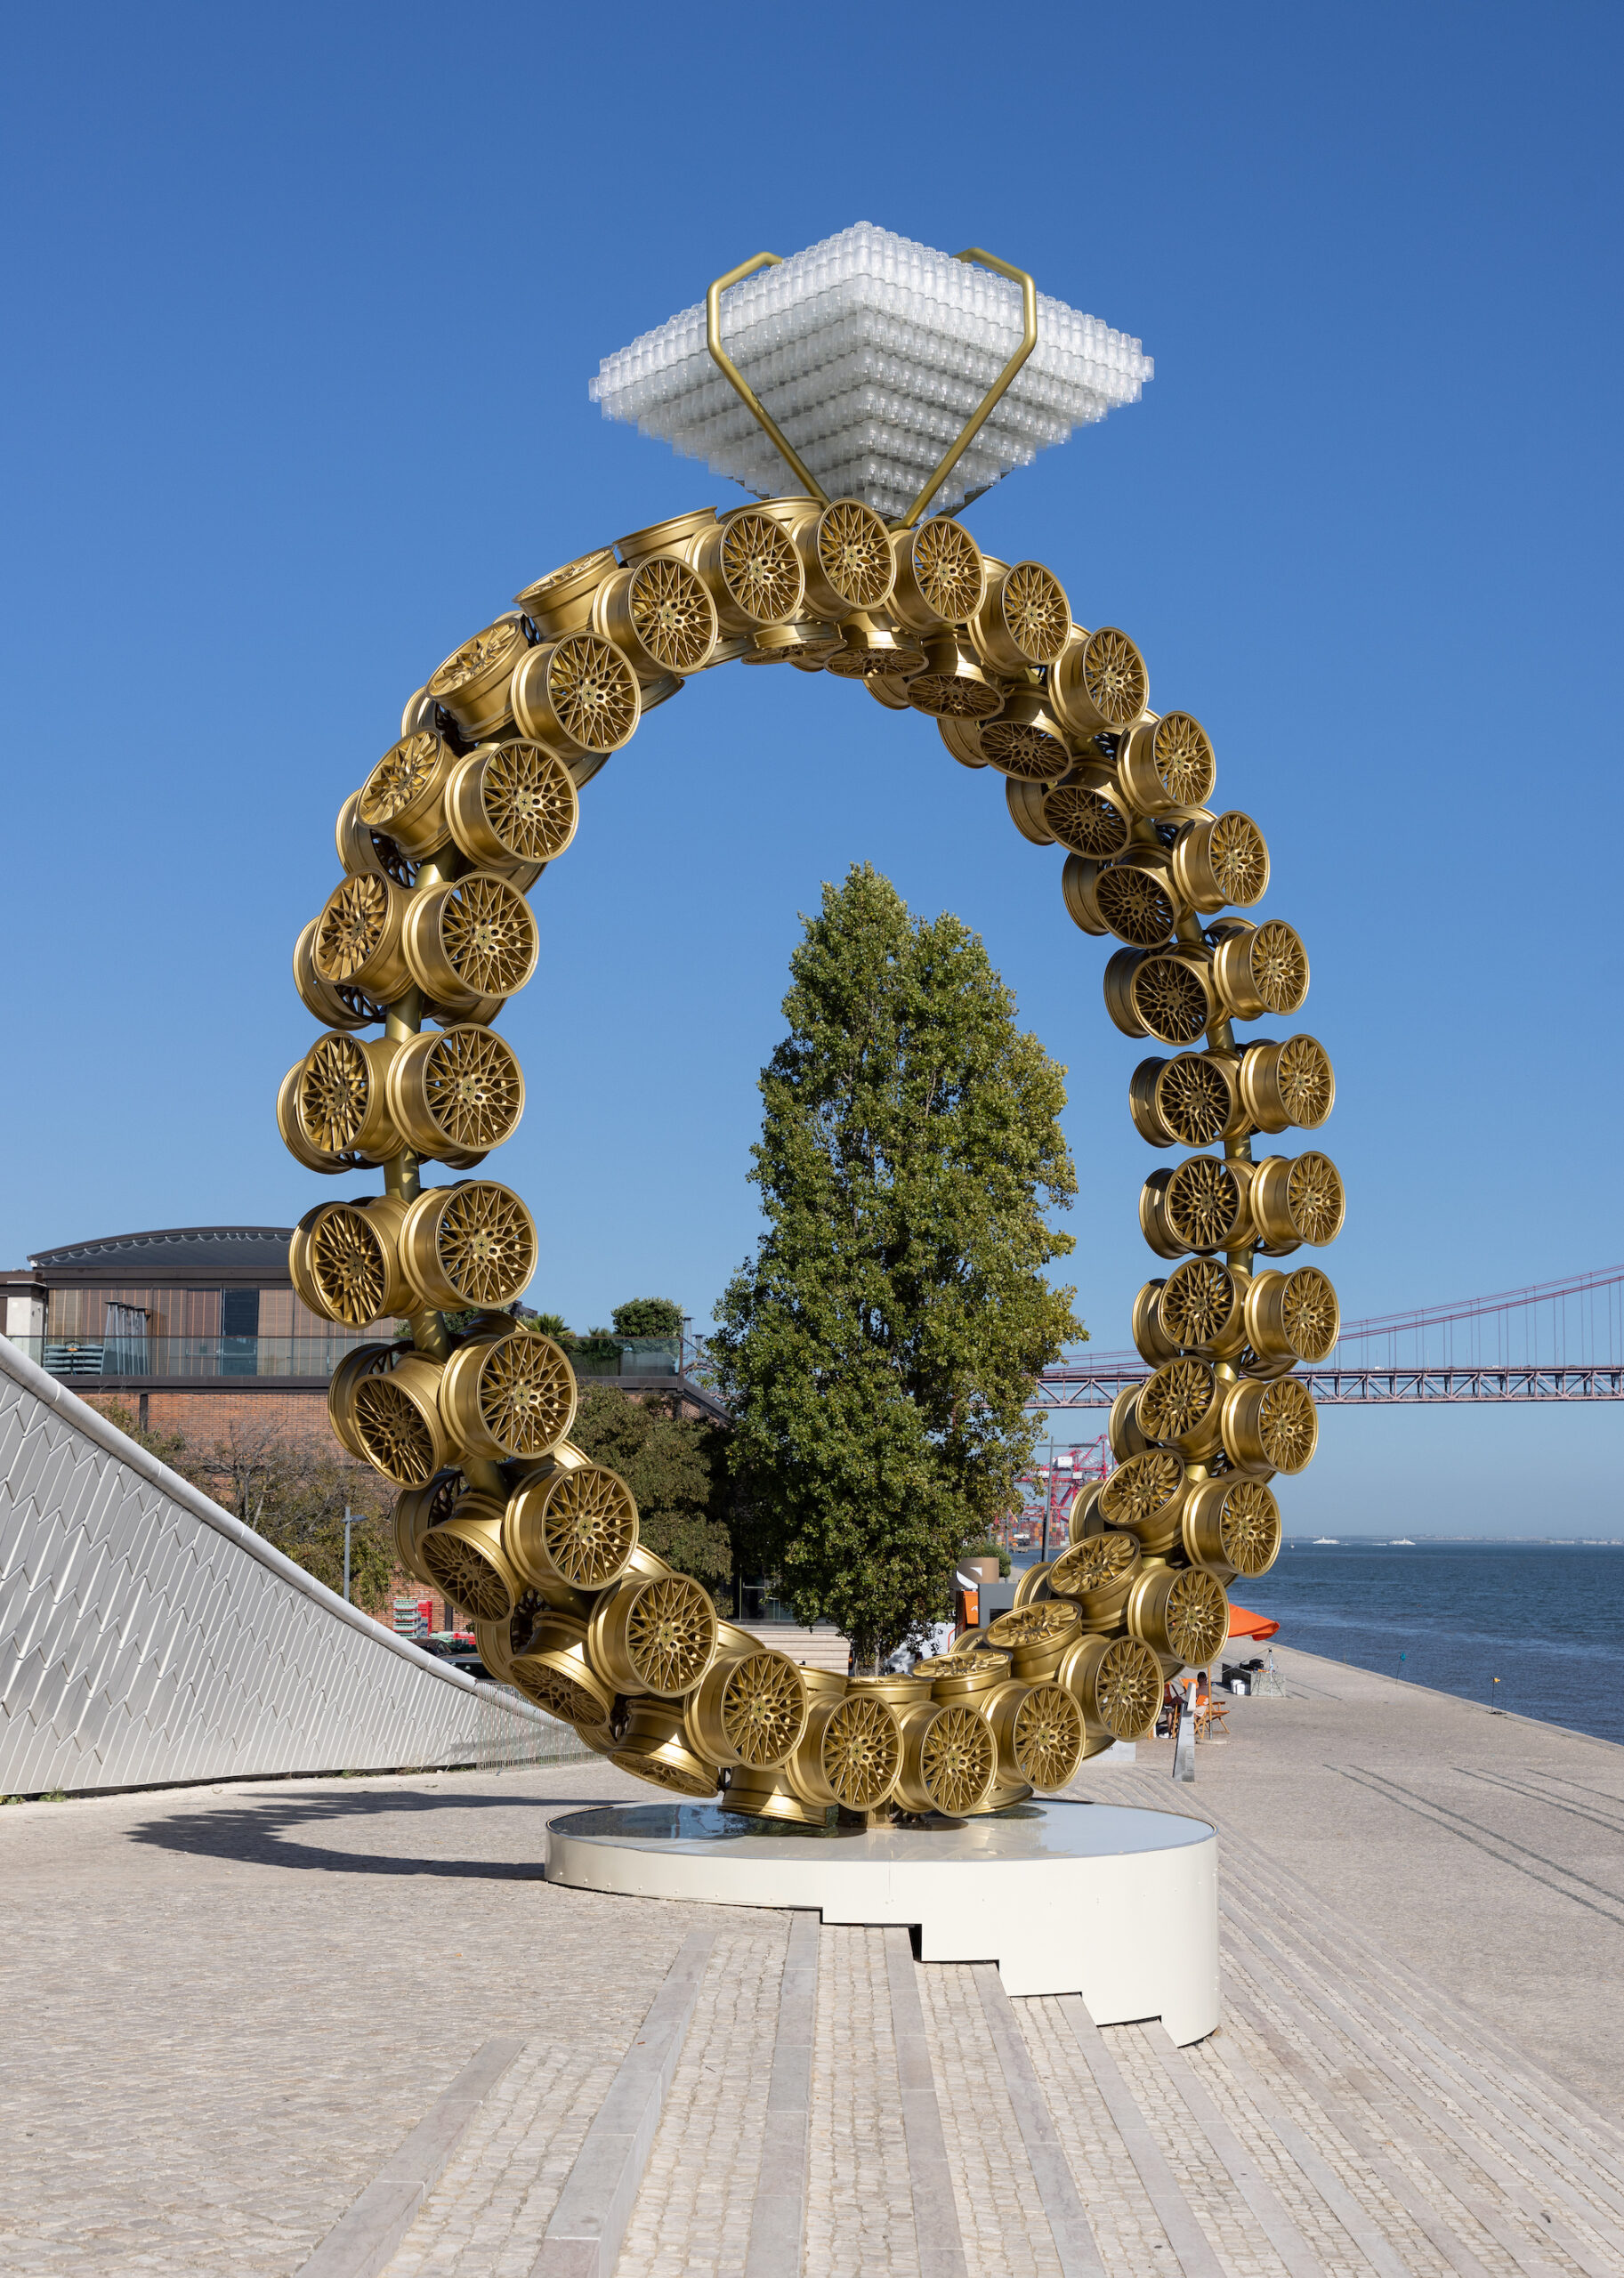 A large sculpture of a diamond ring made out of car wheels and glass.